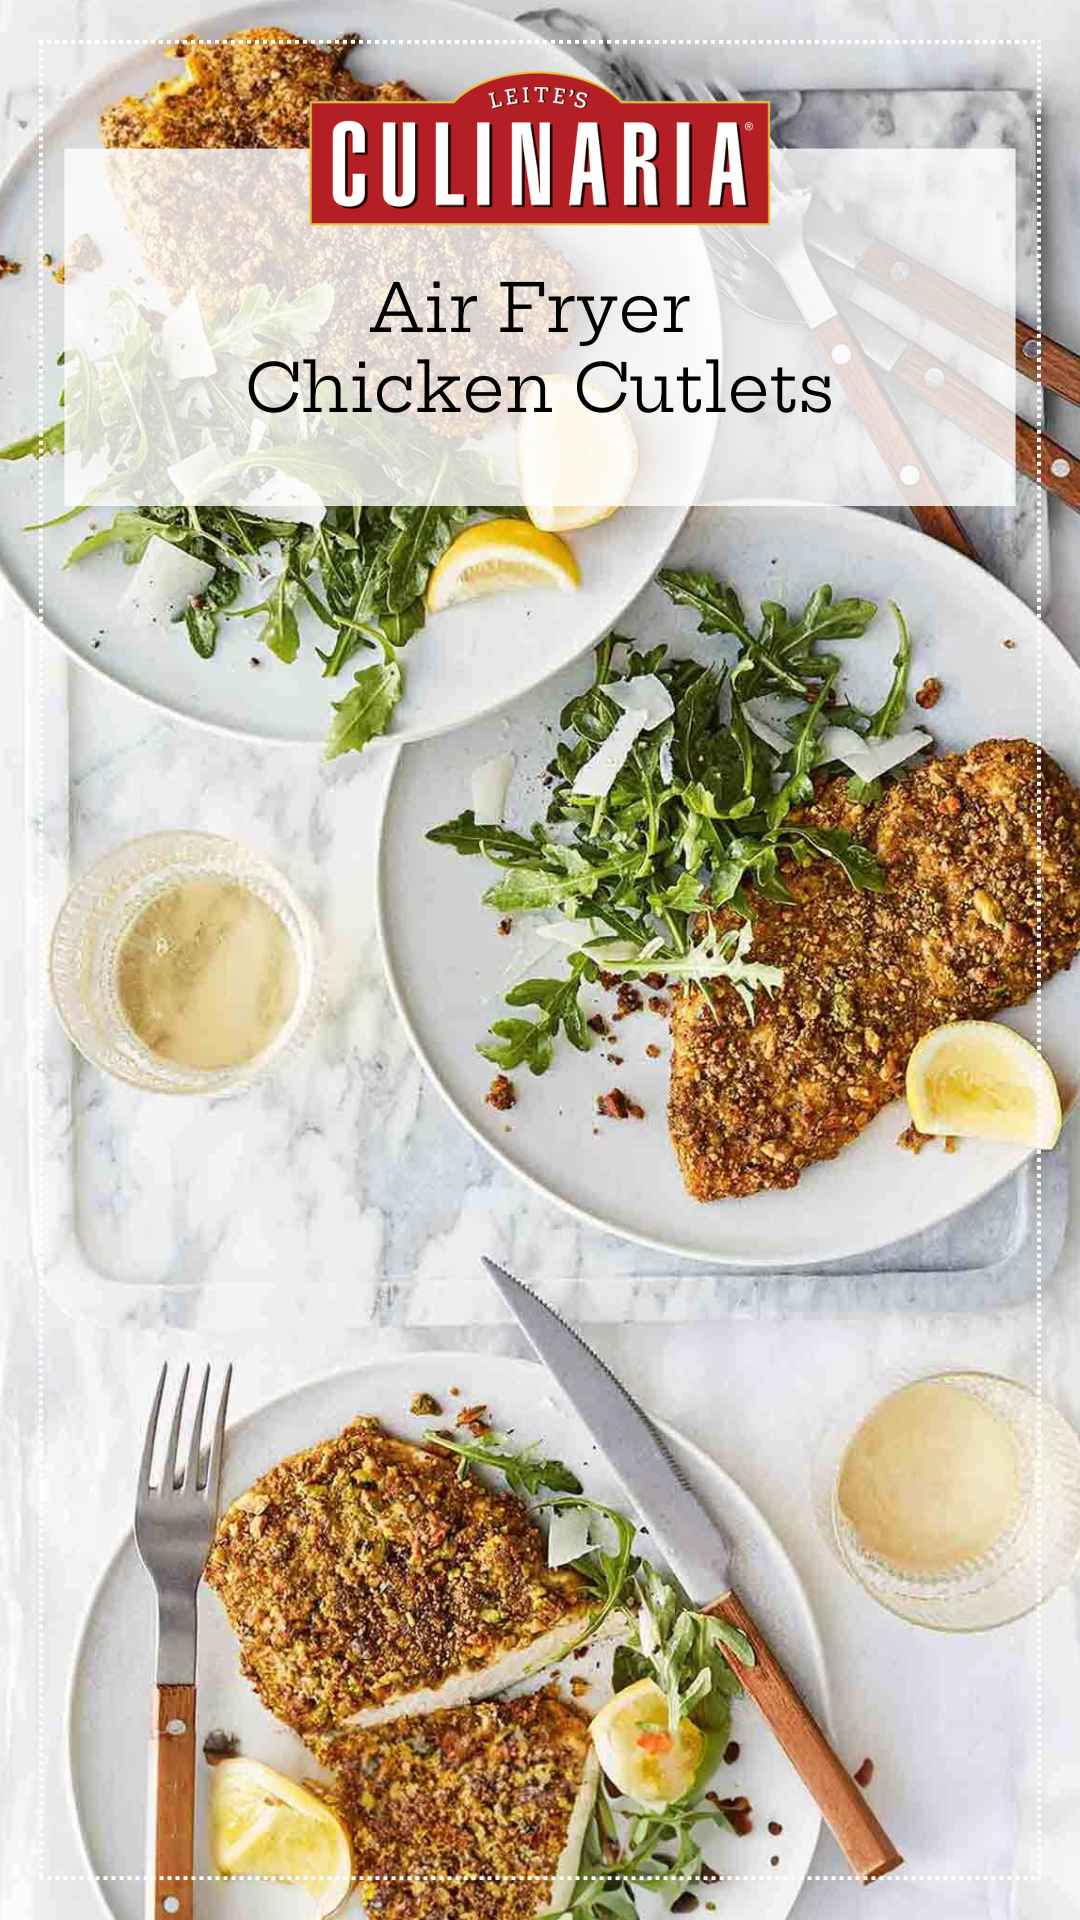 Three plates with a pistachio-crusted chicken cutlet, a lemon wedge, and an arugula and Parmesan salad on each one.